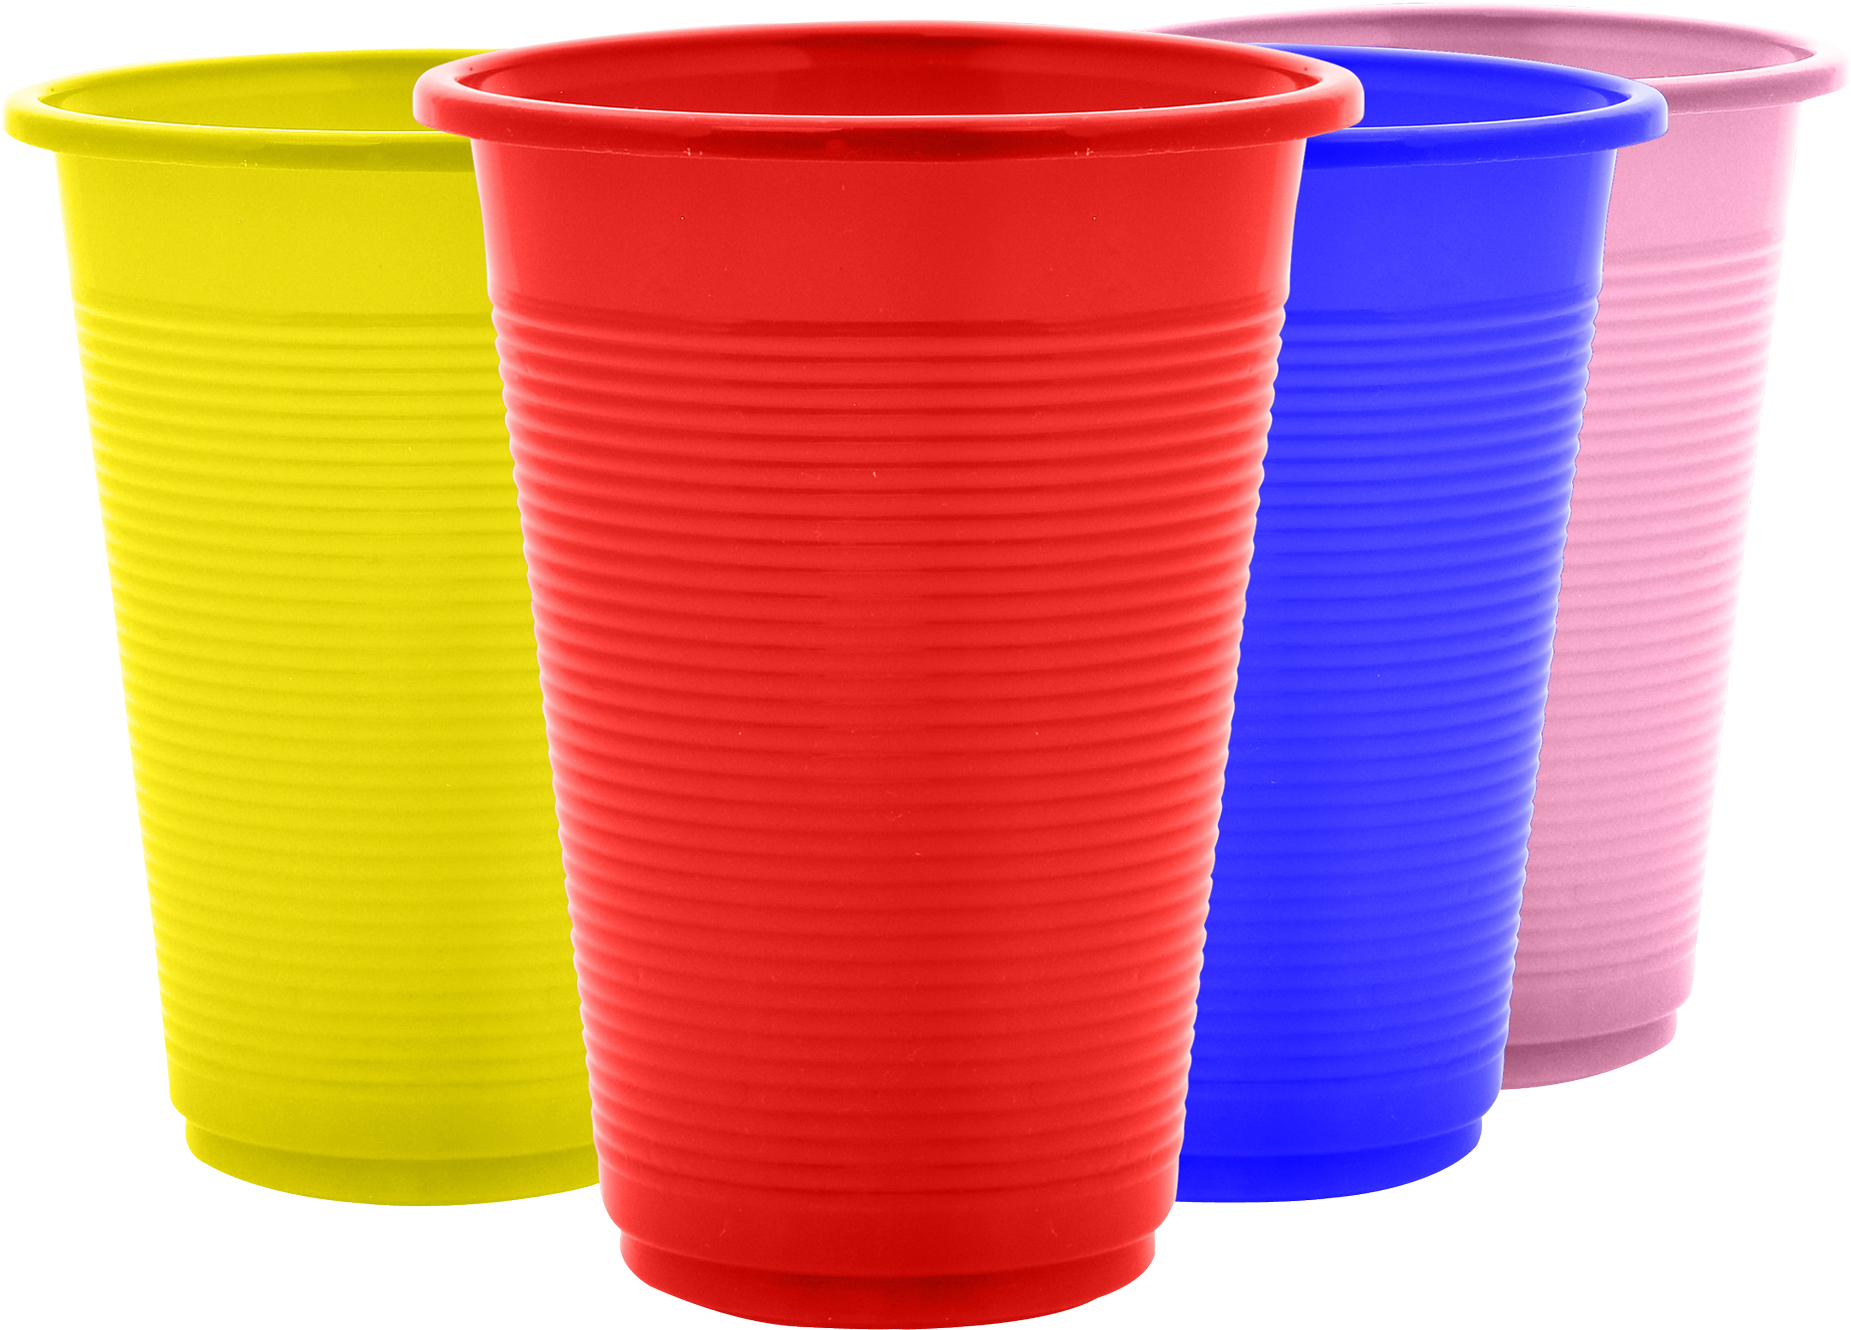 A Group Of Colorful Plastic Cups